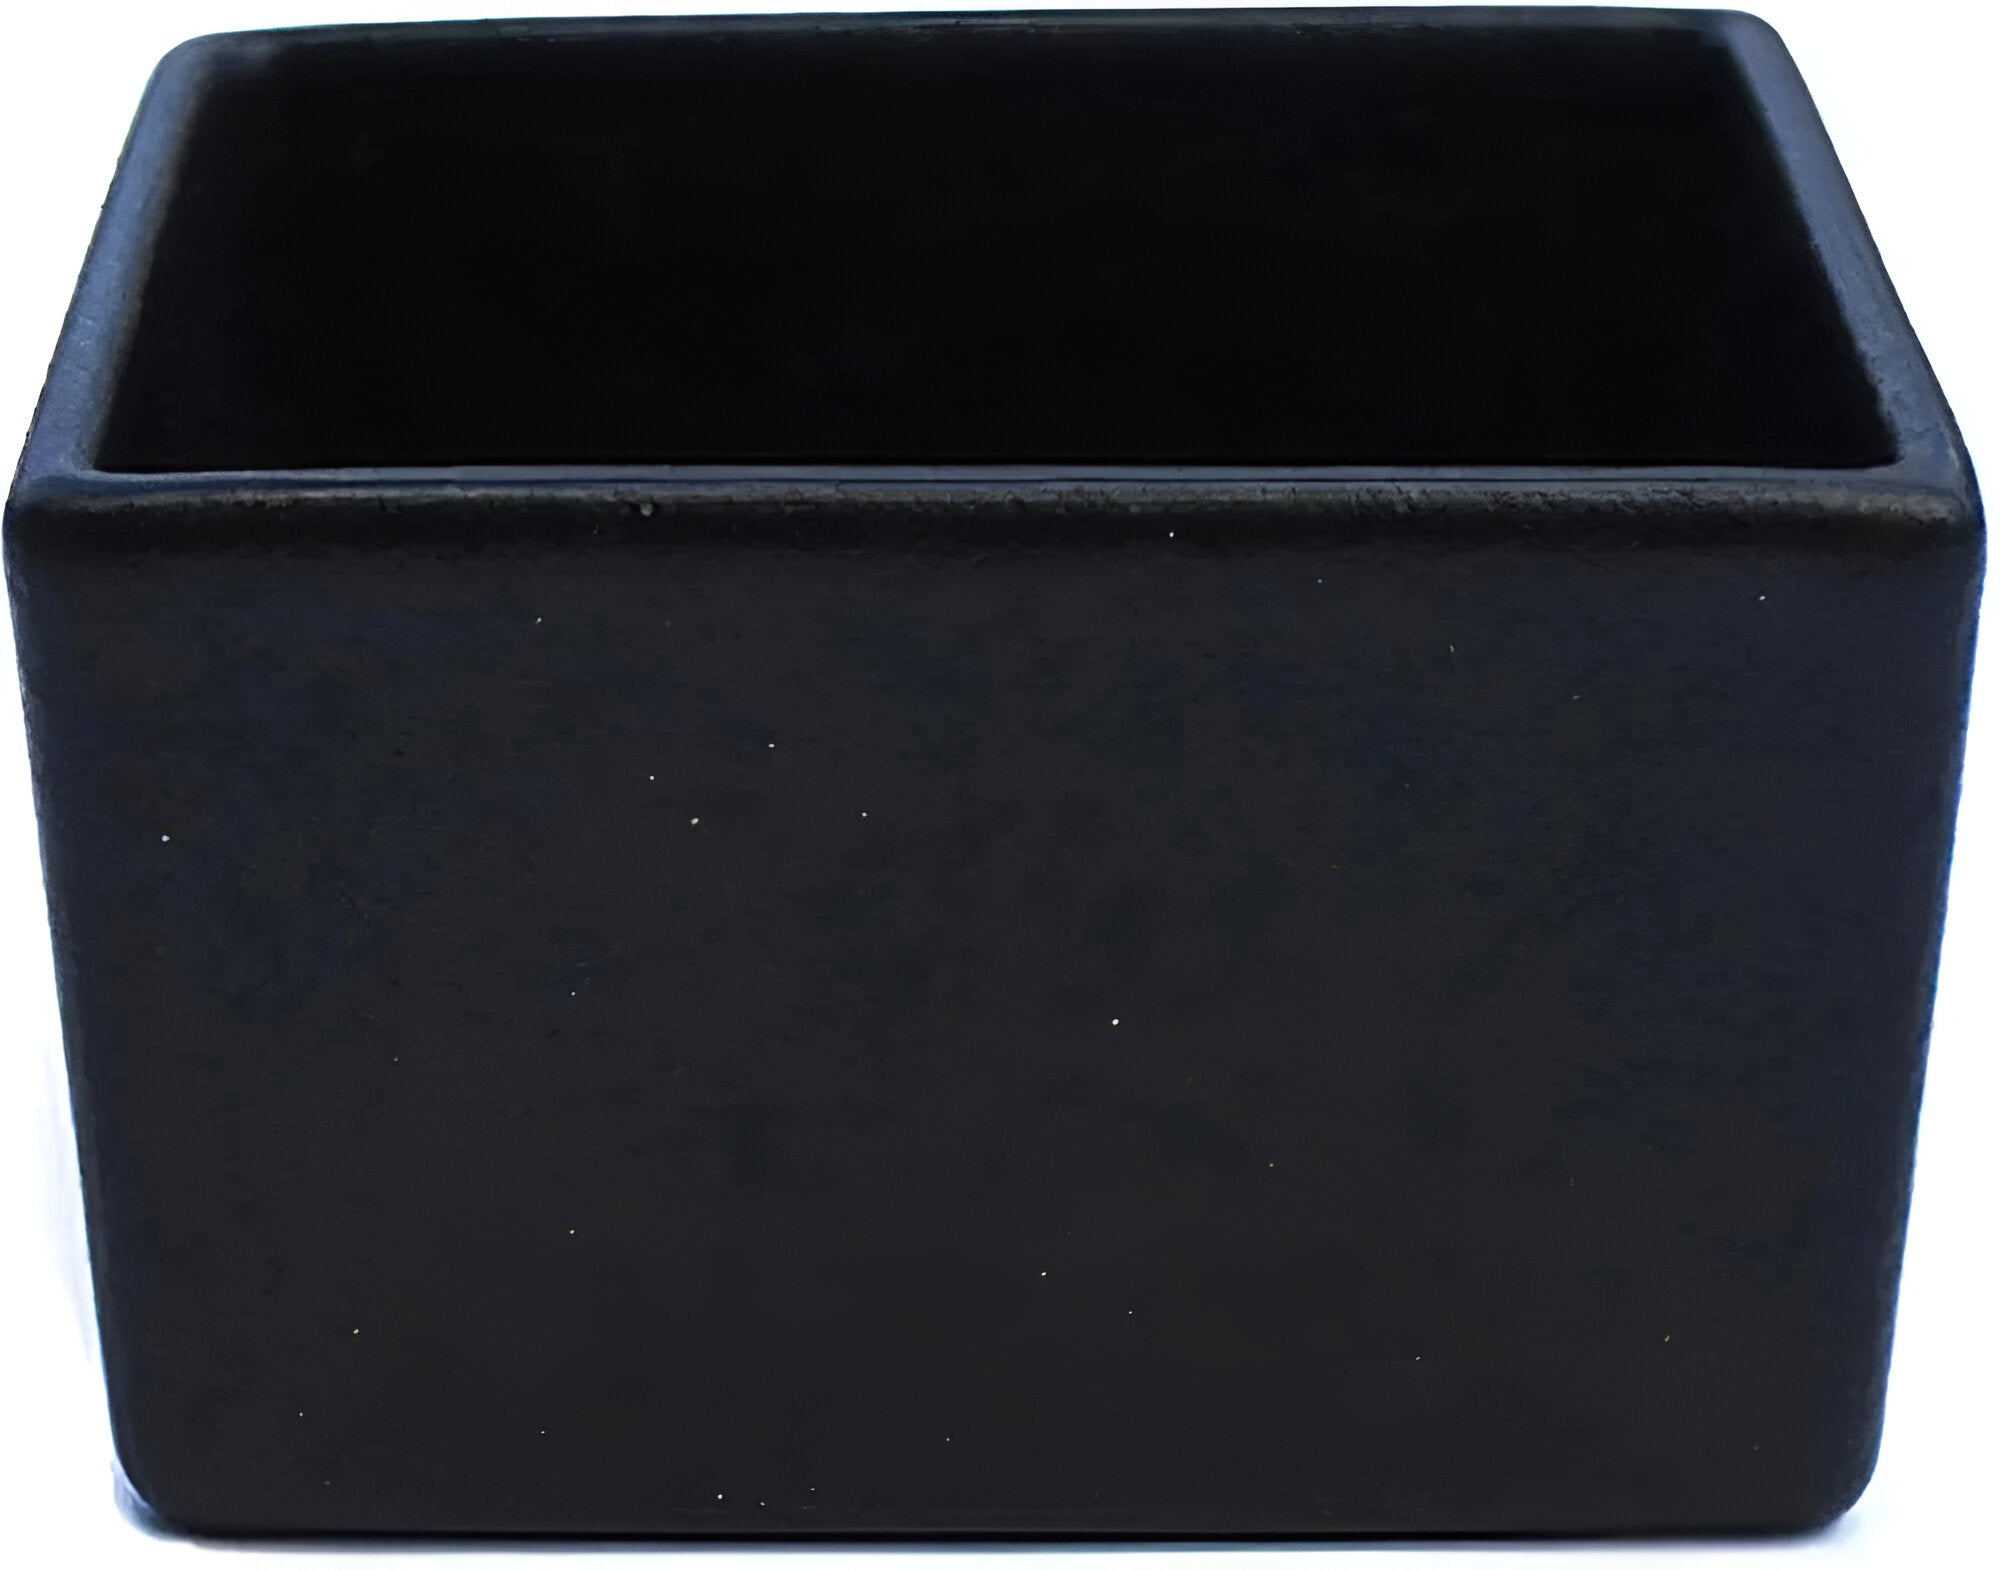 Bugambilia - Classic 253.62 Oz Black Square Straight Sided Salad Bowl With Elegantly Textured - COMP18BB